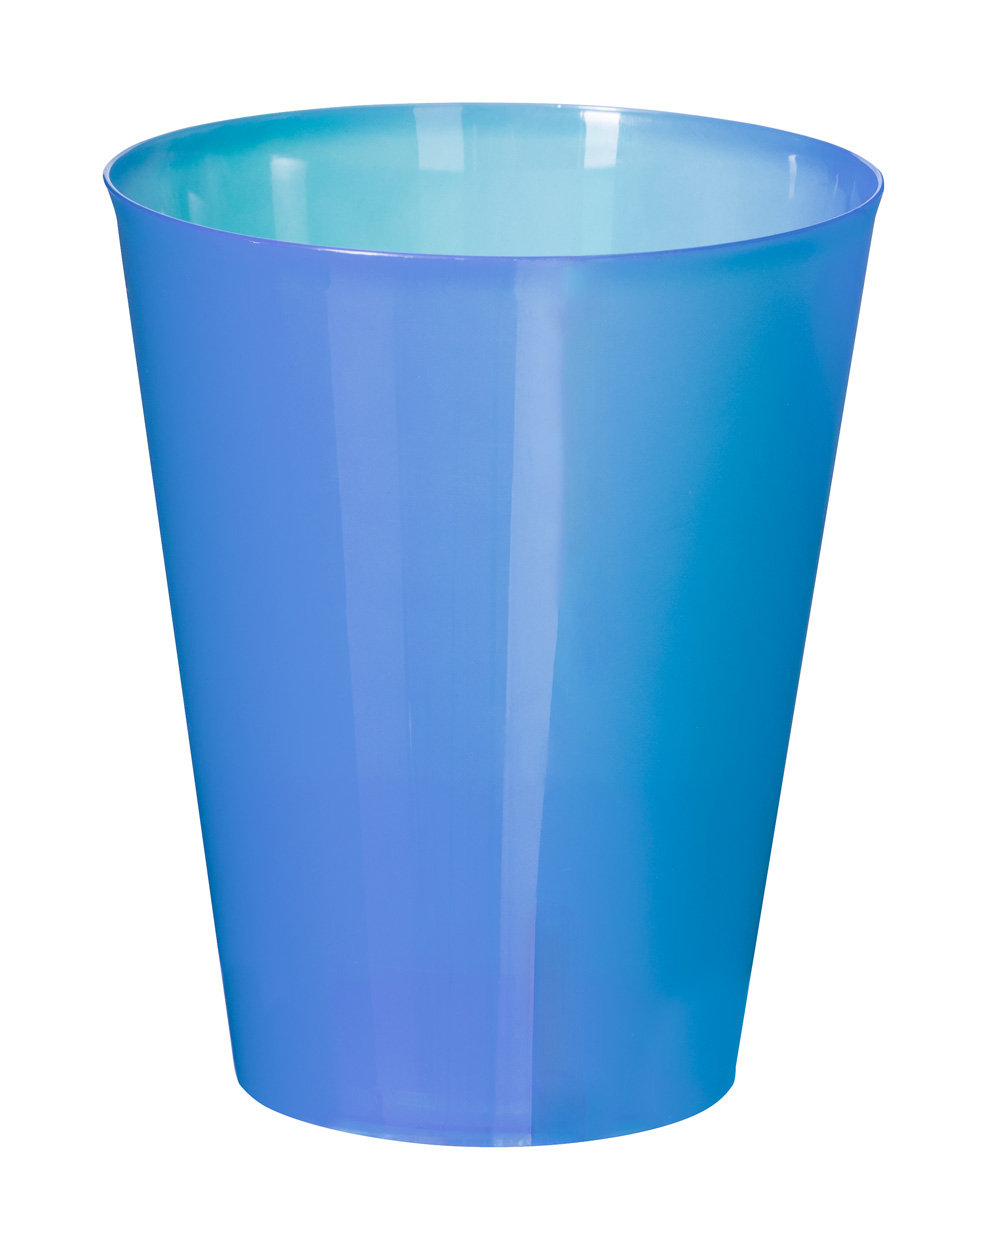 Colorbert reusable cup for events - blue